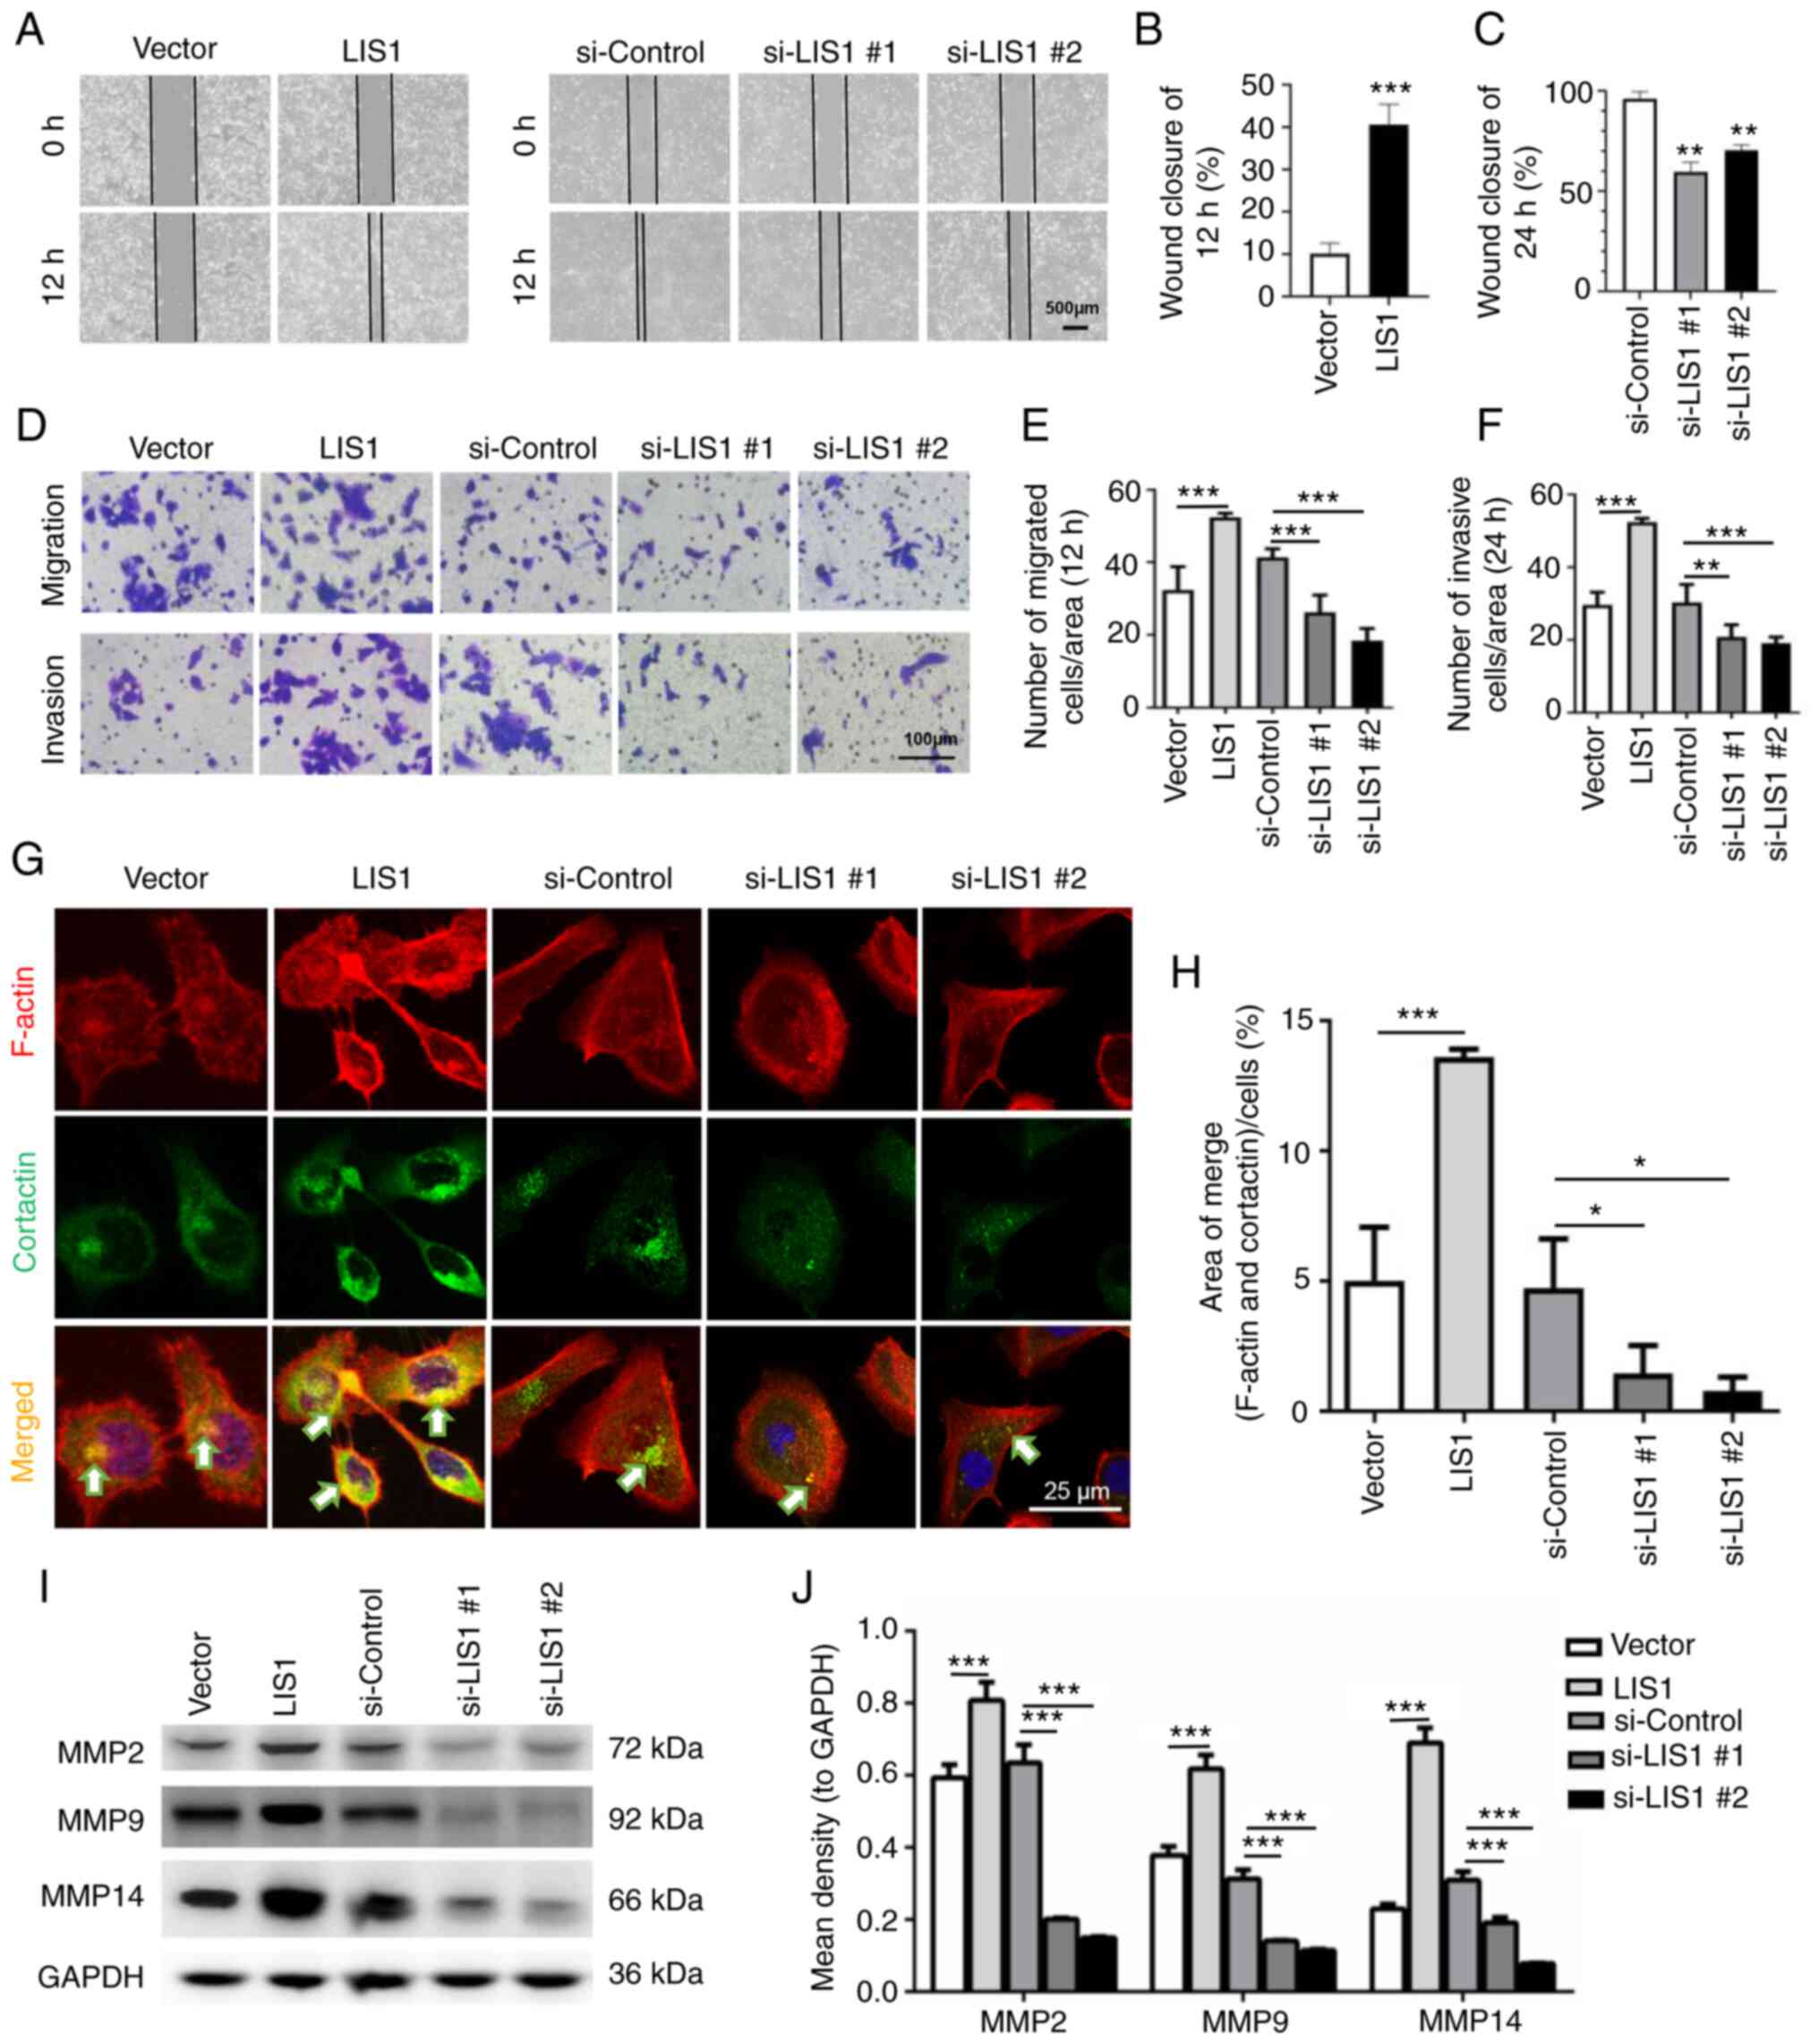 Lis1 Interacts With Clip170 To Promote Tumor Growth And Metastasis Via The Cdc42 Signaling